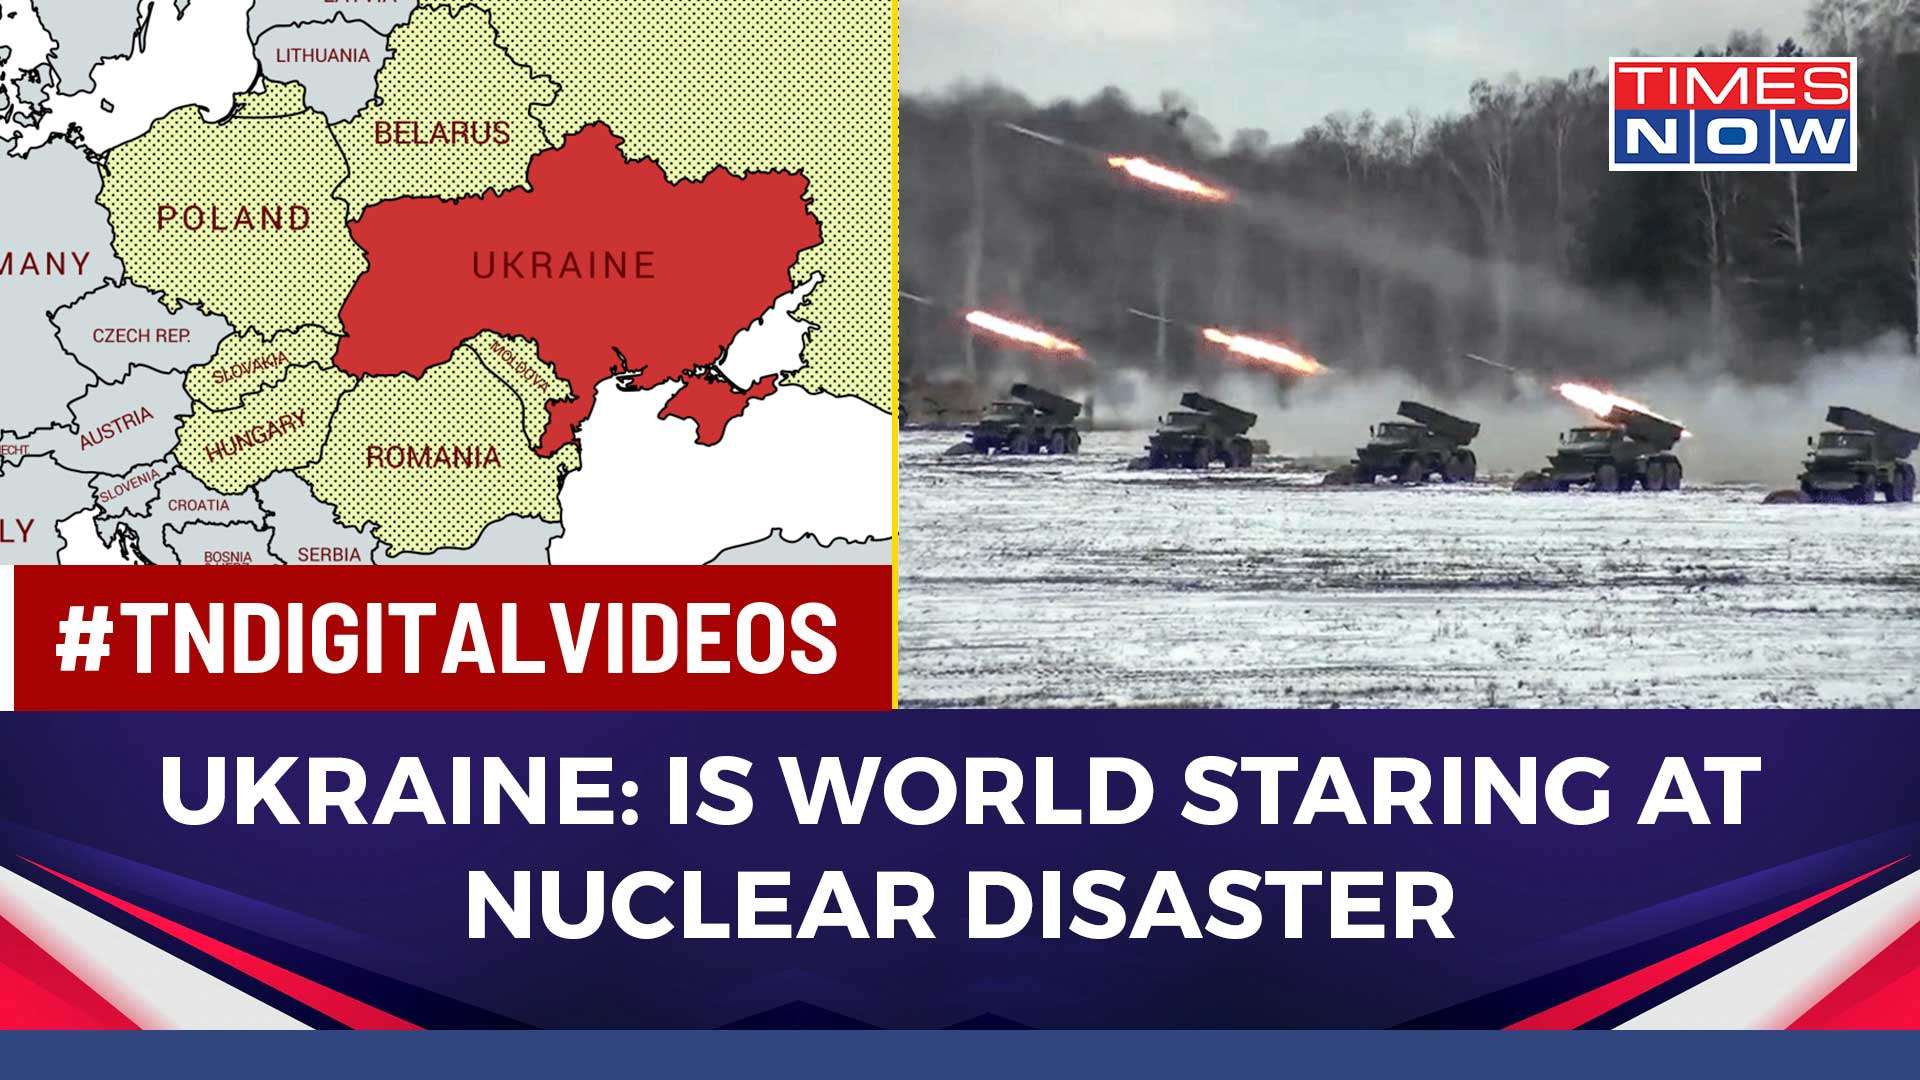 Serious Crisis Lurks Amid Shelling Of Ukraine Nuke Plant Nuclear Disaster Possible World News English News